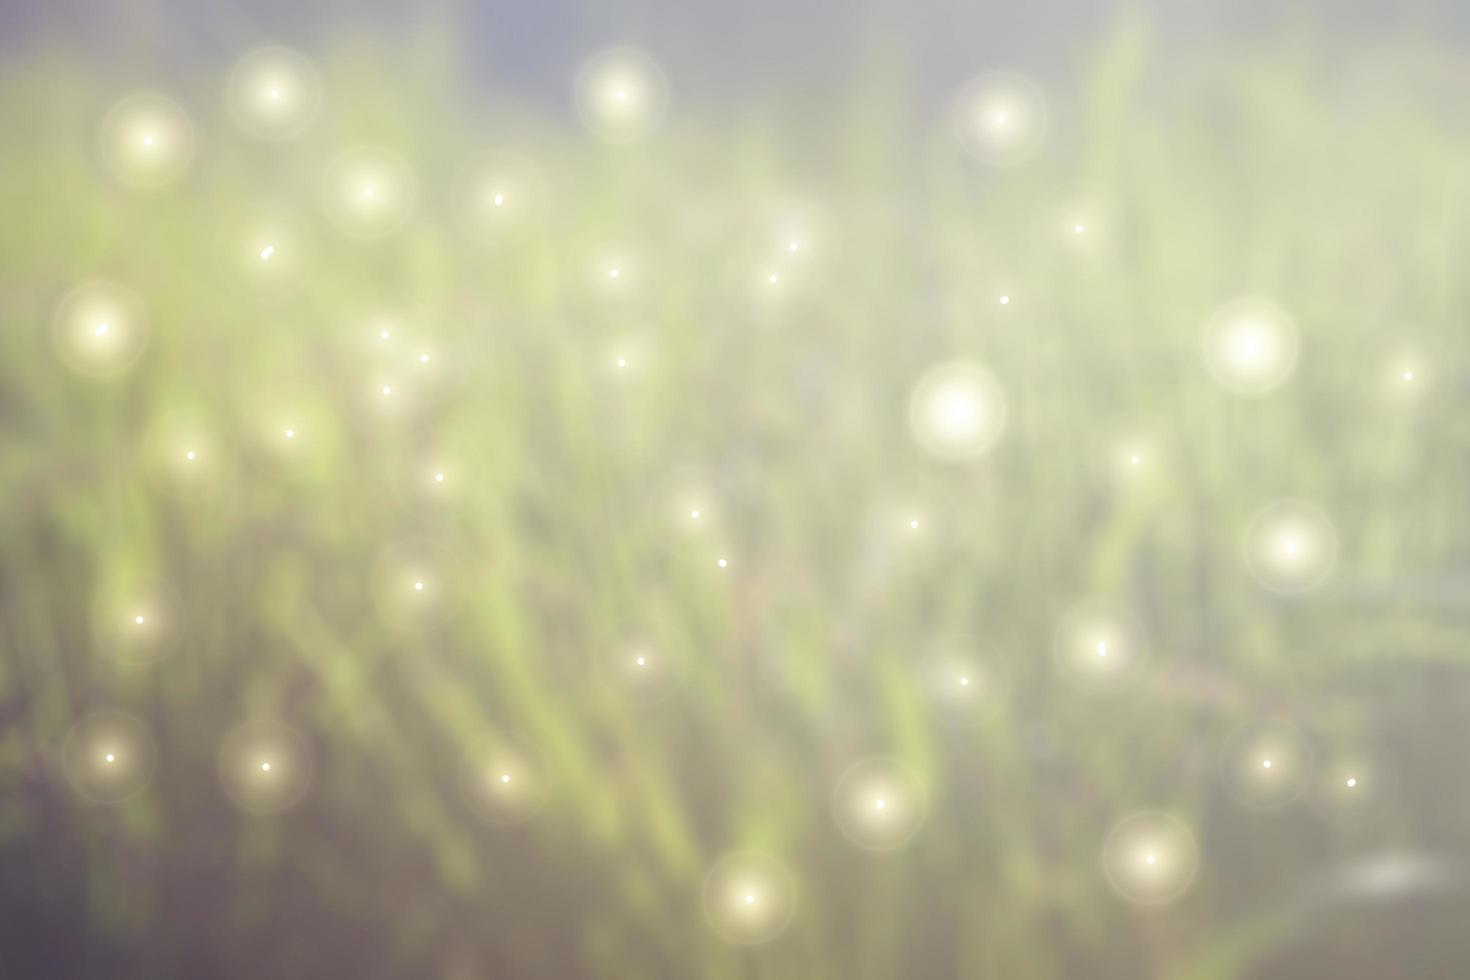 Fabulous blurred background with highlights in light green the grass photo